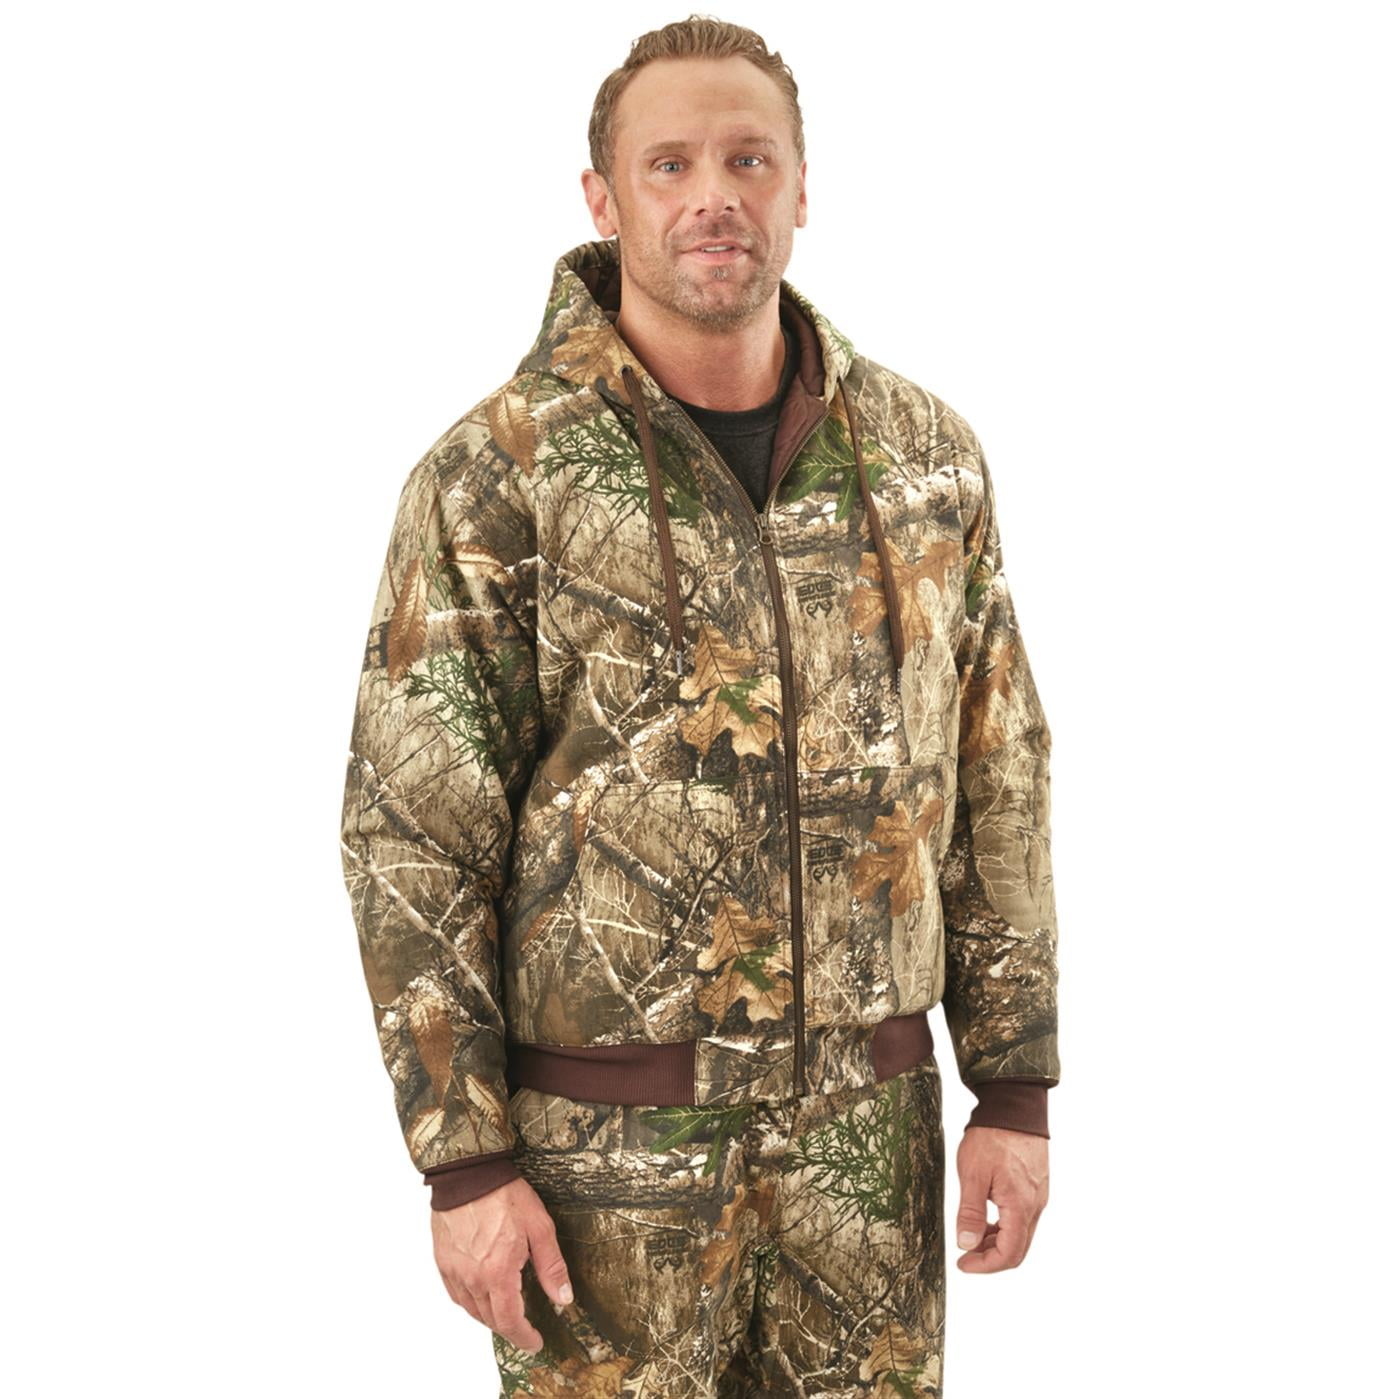 NEW VIEW Thick Hunting Jacket Cold Weather Camo Hunting Coat, Insulated  Hunting Clothes for Men